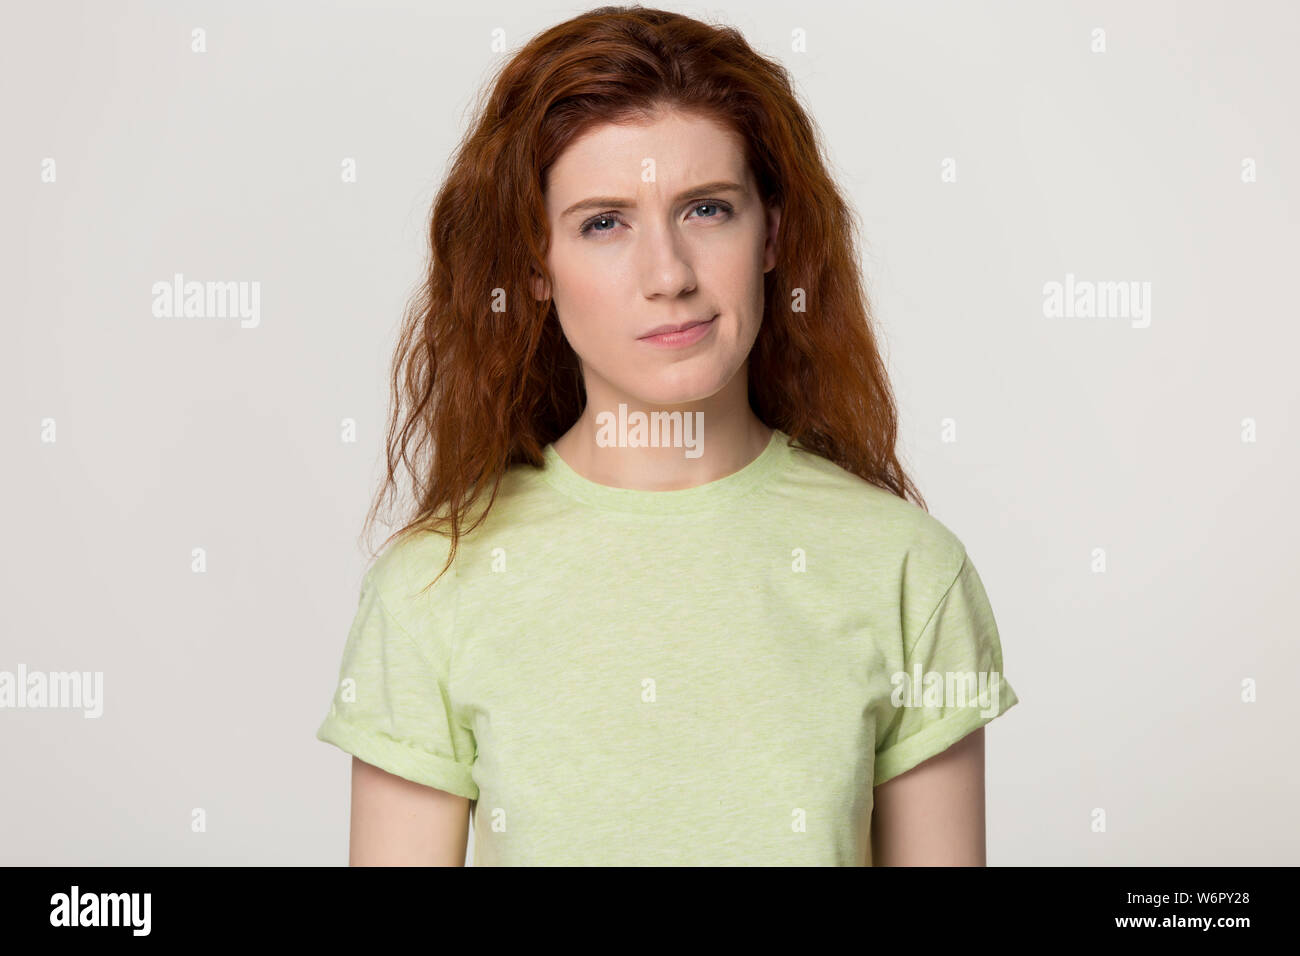 Redhead woman feels confused suspicious pose over grey studio background Stock Photo